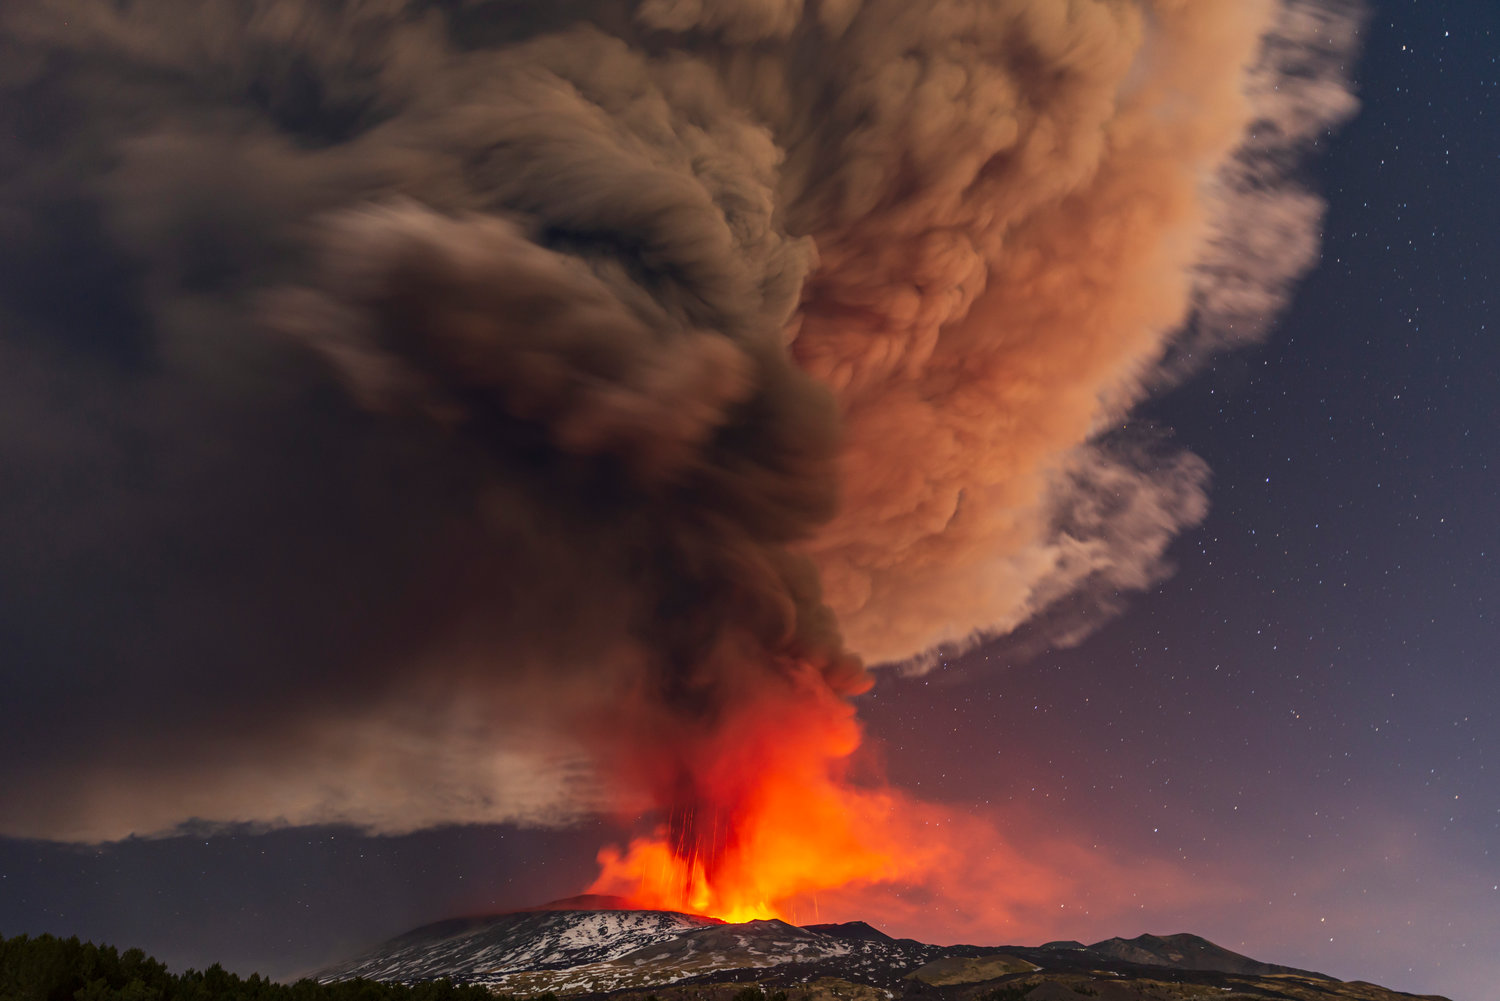 Smoke billows from the Mt. Etna volcano, as seen from Nicolosi, Sicily, southern Italy, Thursday, Feb. 10, 2022. (AP Photo/Salvatore Allegra)